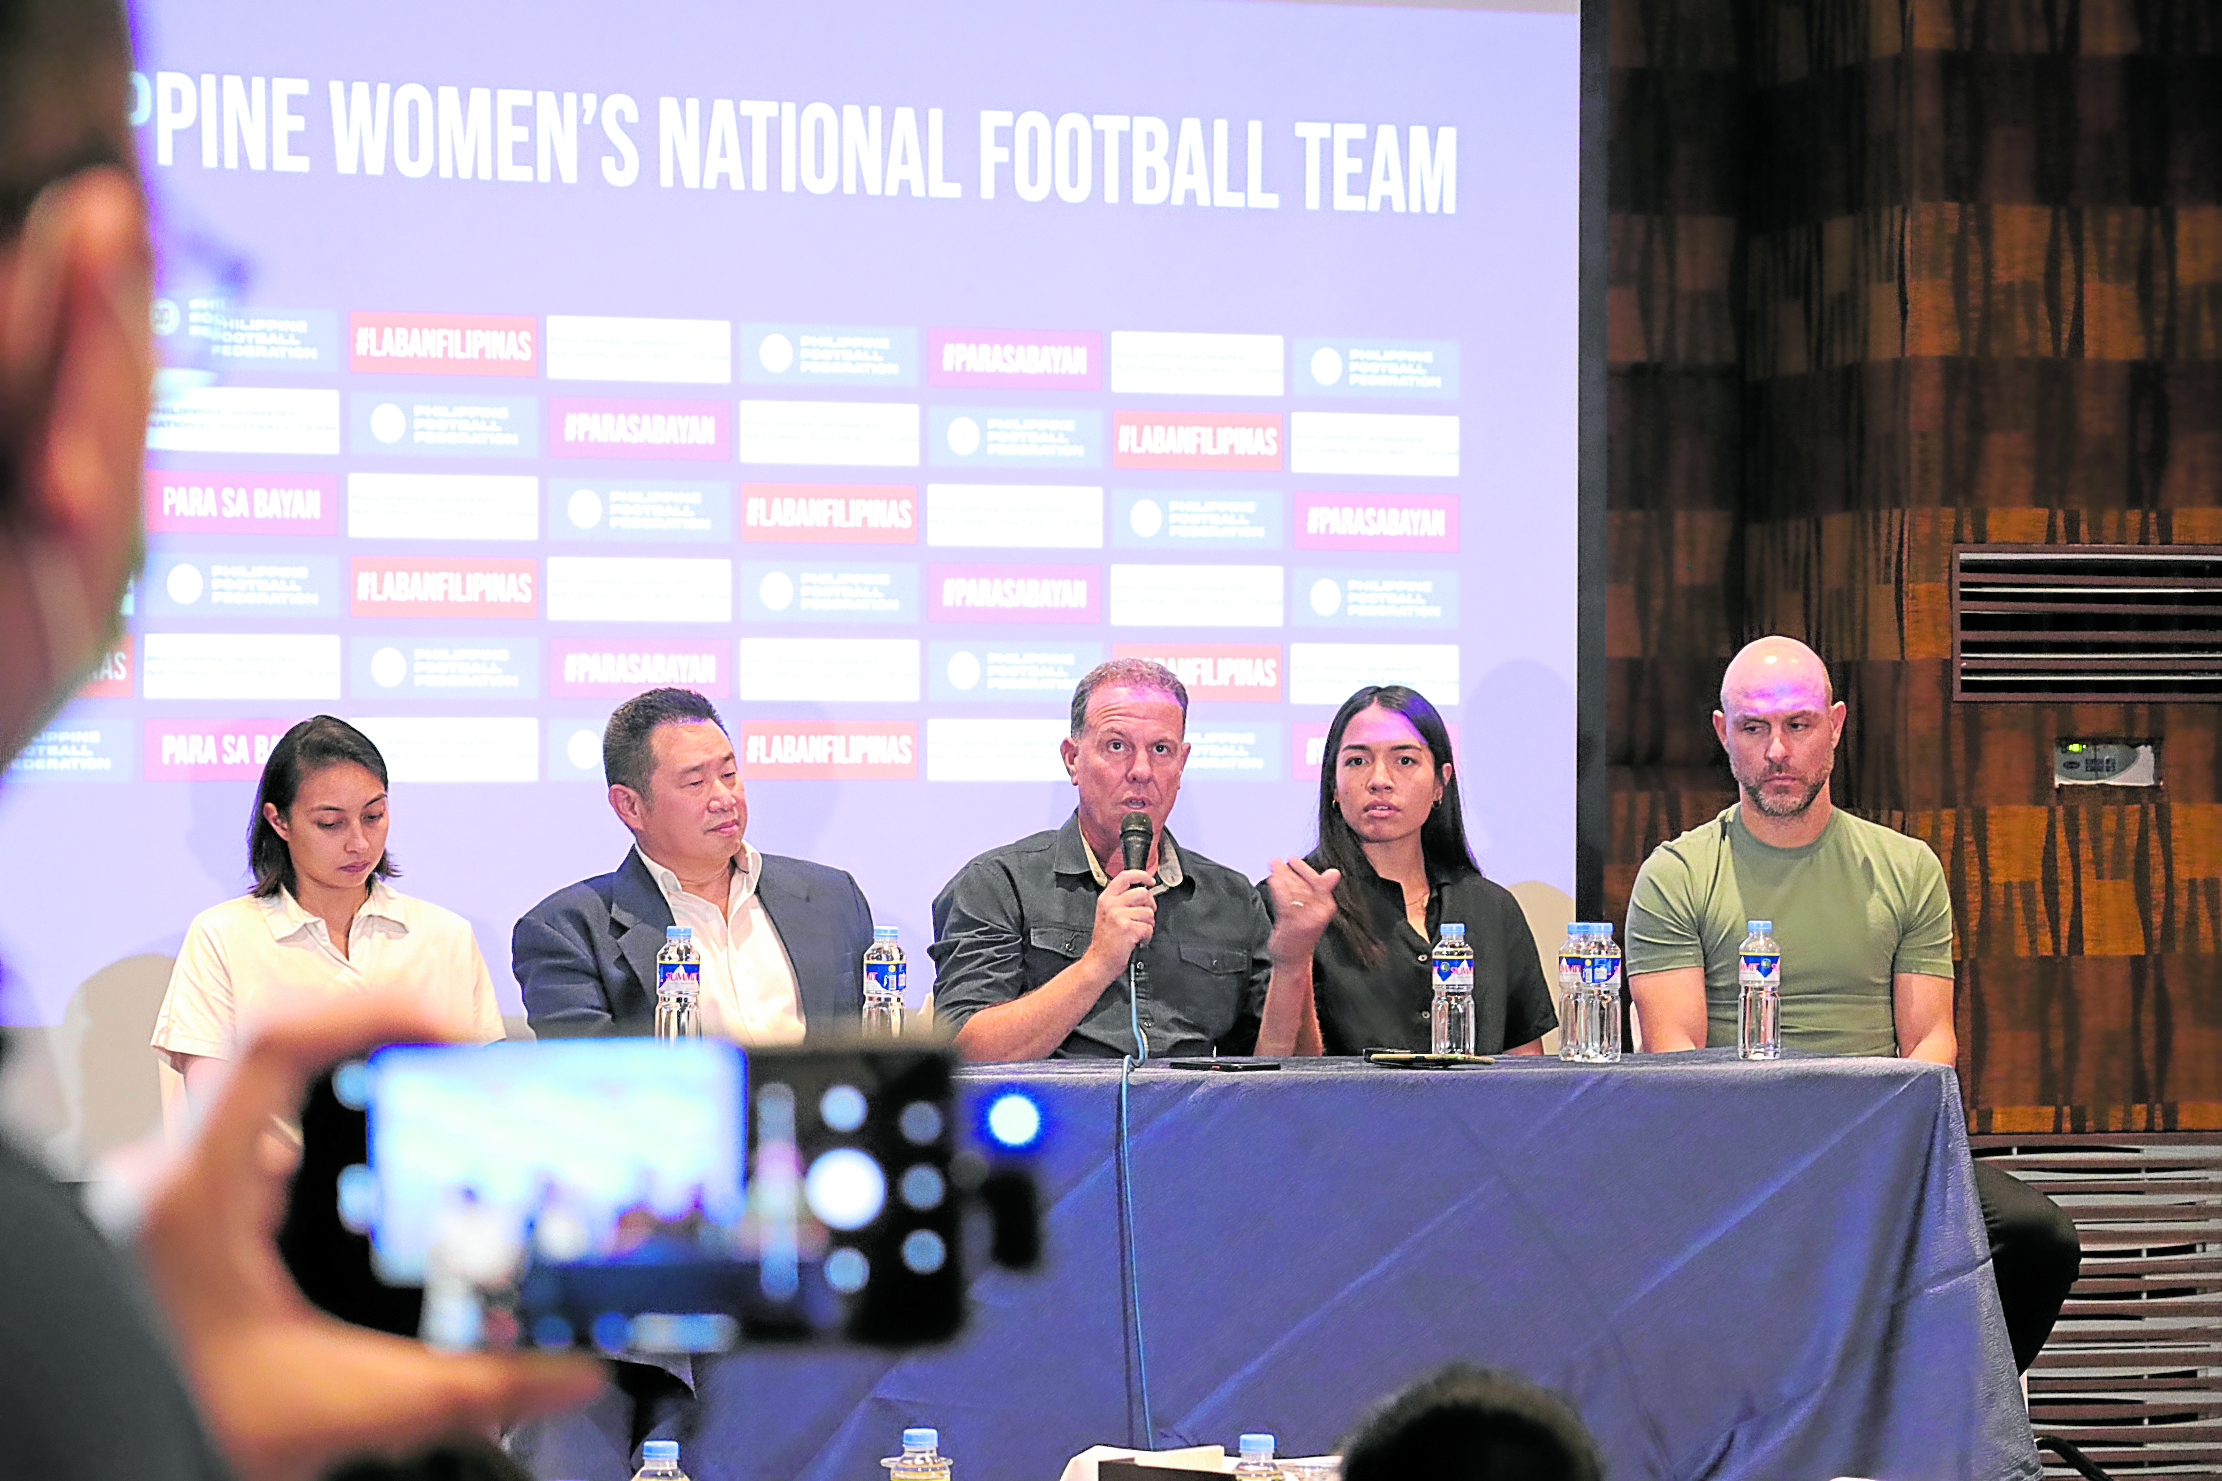 Coach Alen Stajcic (center) answers questions during the presscon together with (from left) goalkeeper Inna Palacios, team manager Jefferson Cheng, defender Hali Long and U-20 head coach Nahuel Arrarte